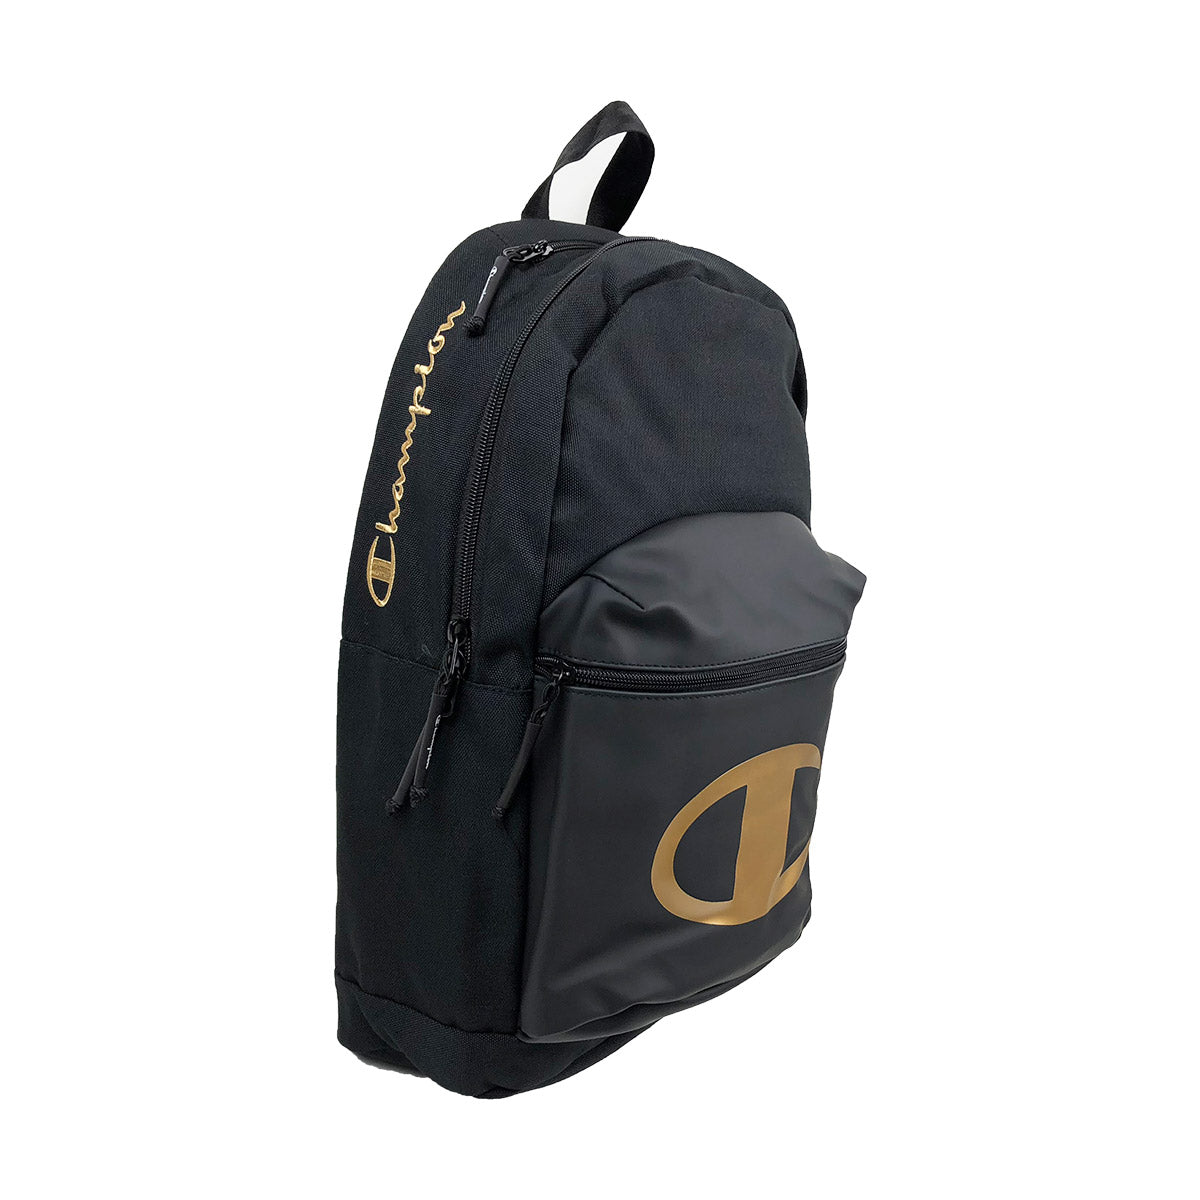 gold champion backpack